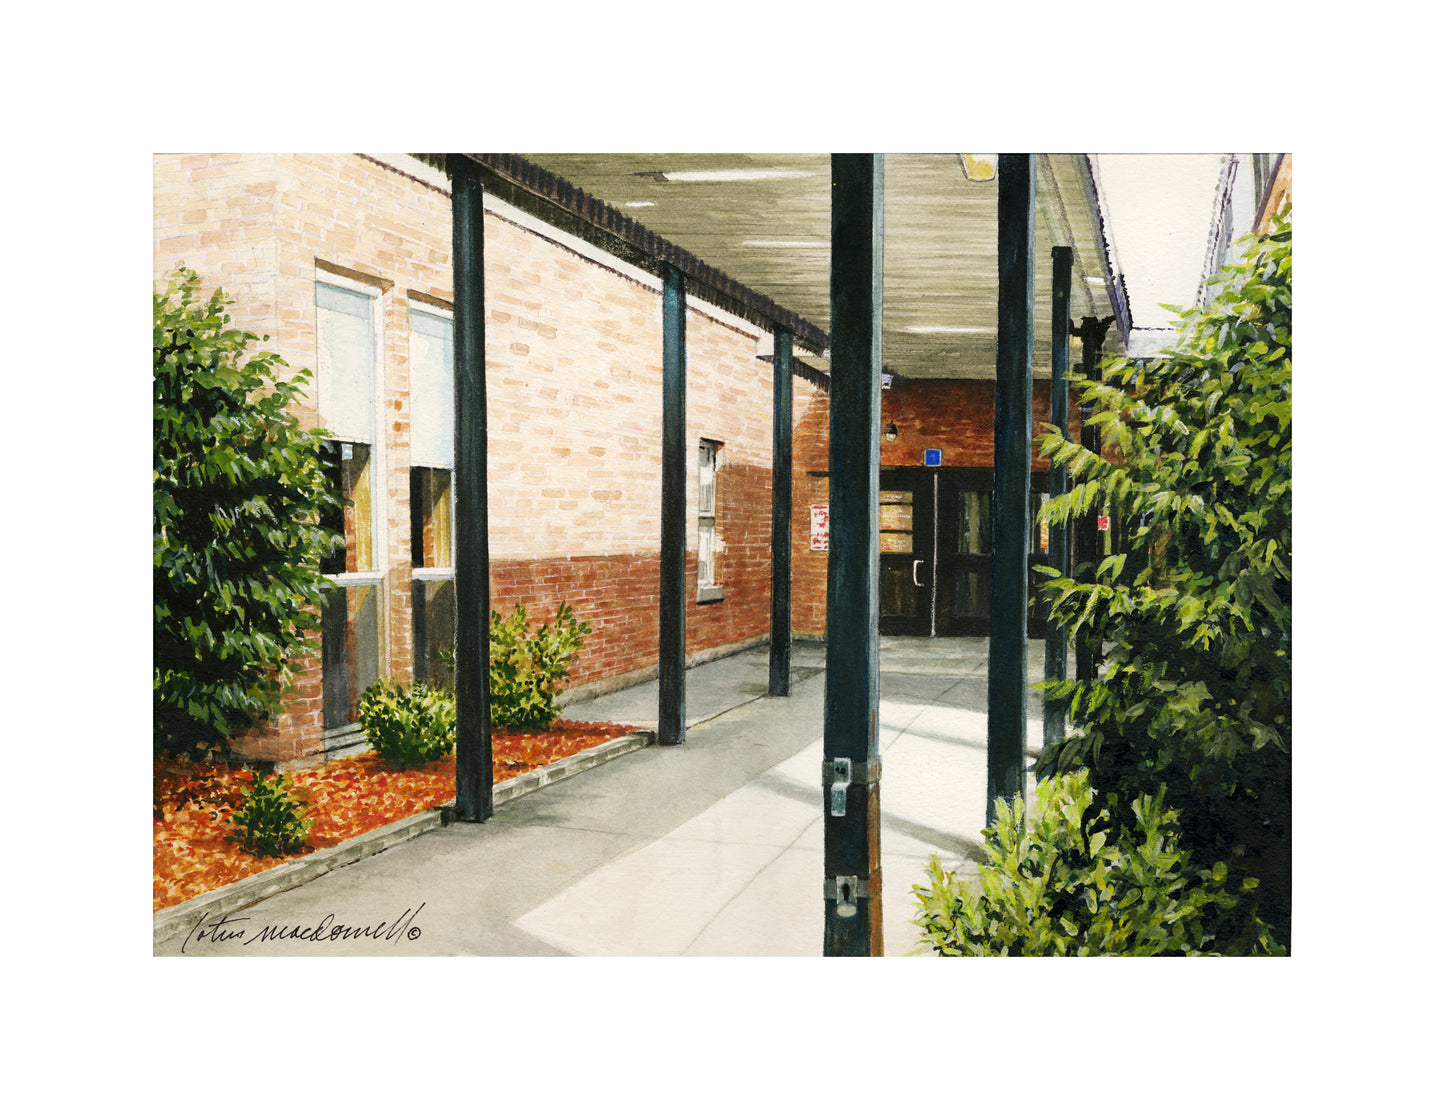 Introducing the Limited-Edition Print version of "Bridgeport High School", the original full color, watercolor painting, by Lotus MacDowell, featuring the entrance walkway to the town's high school, bathed in sunlight and shadows.